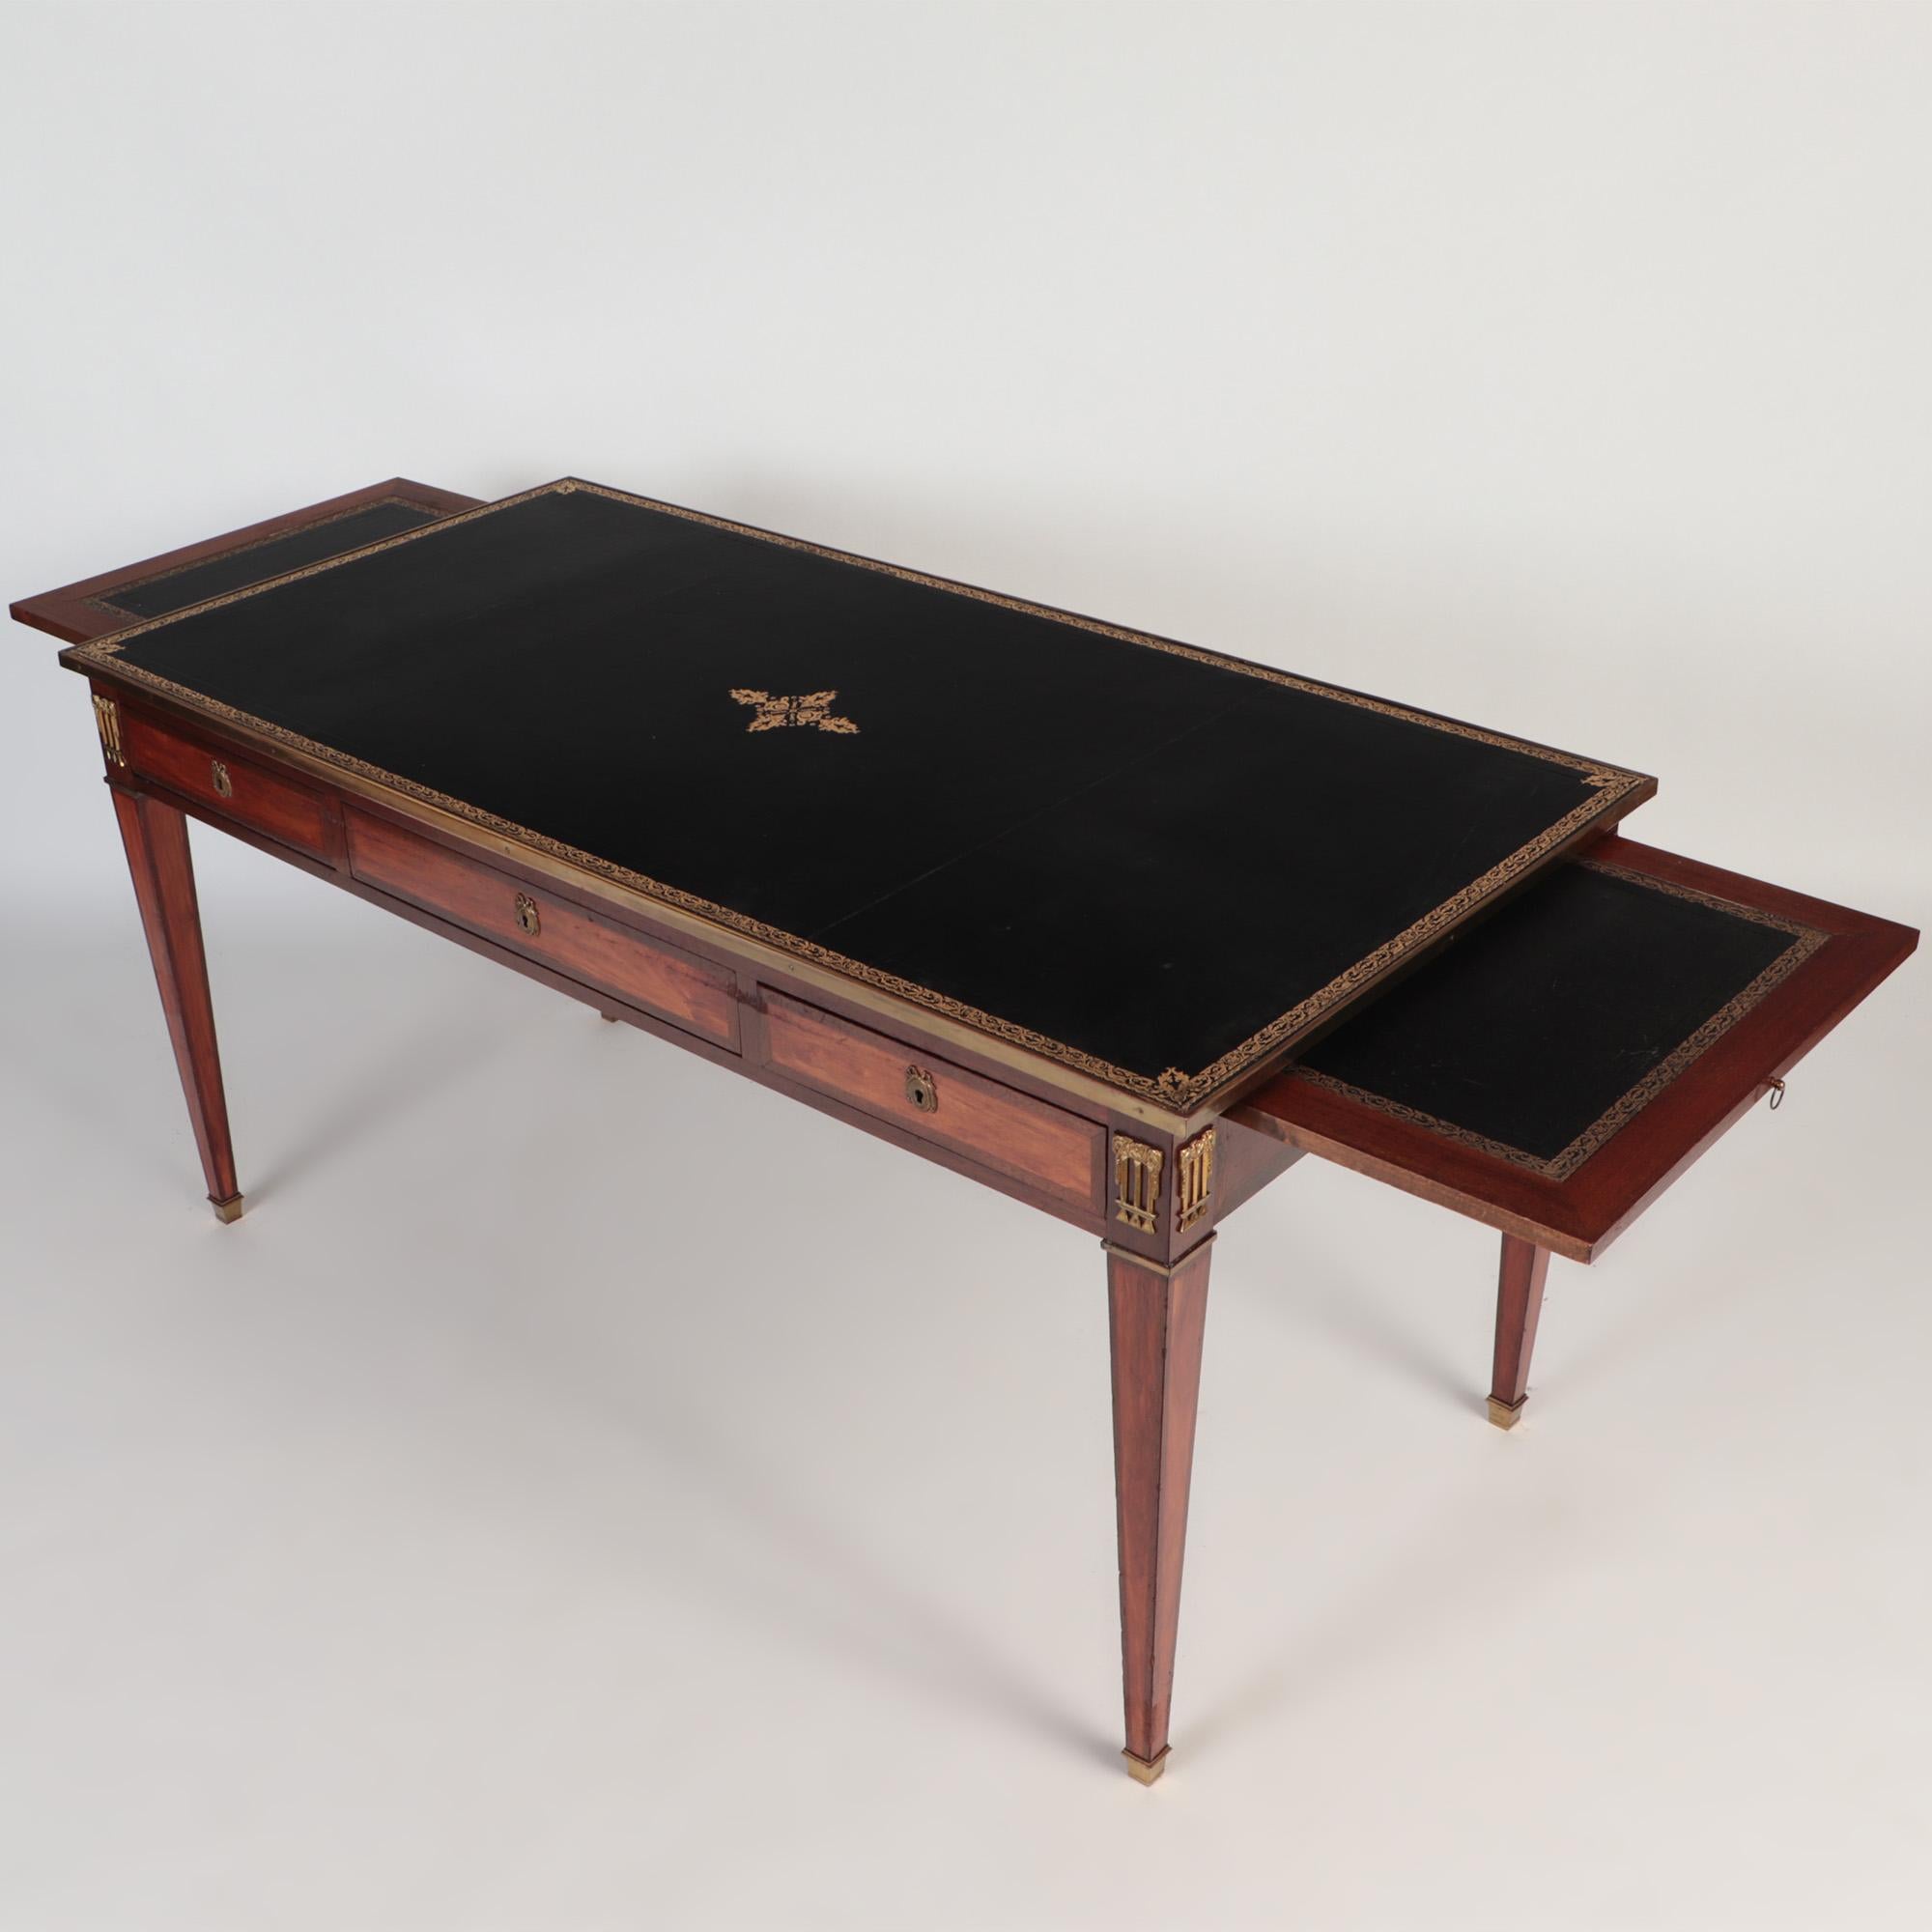 Leather A French Louis XVI style three drawers writing desk or bureau plat, 19th C.